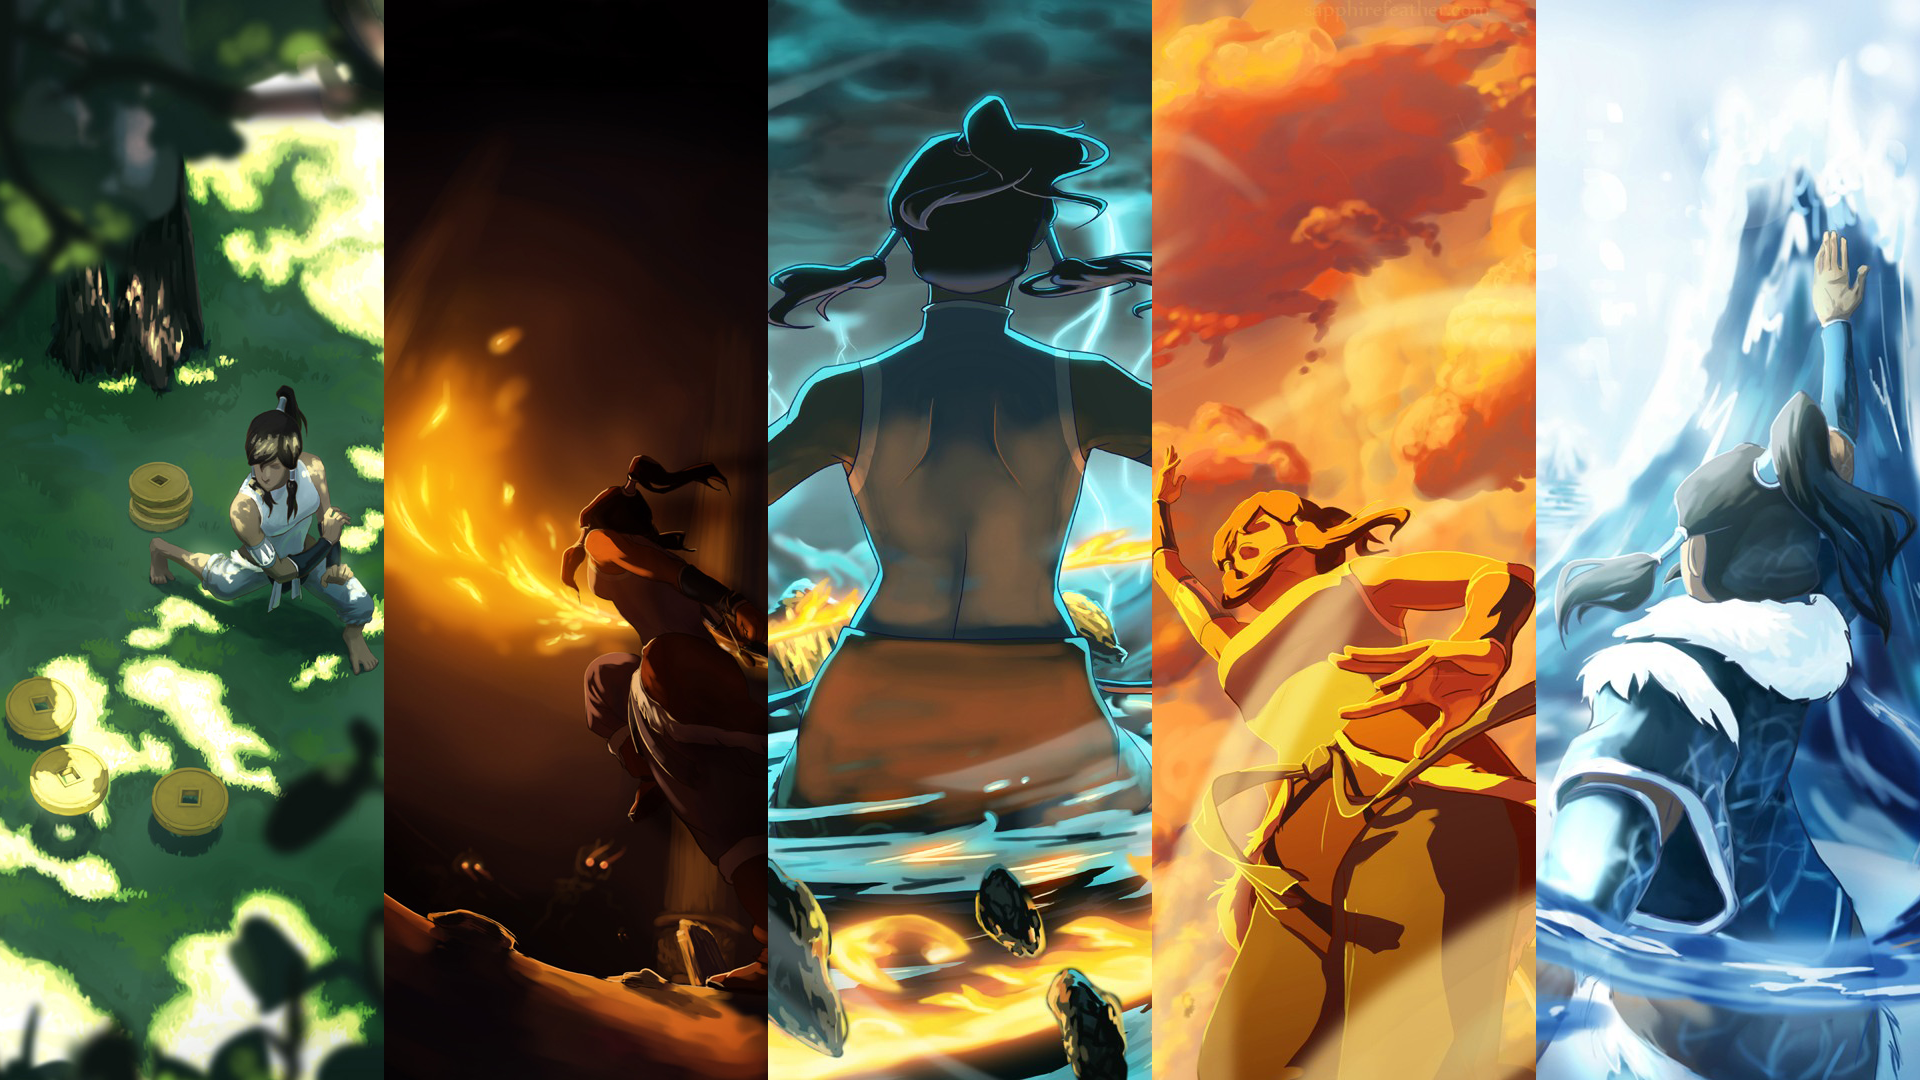 Avatar The Last Airbender panels collage wallpaper | 1920x1080 ...